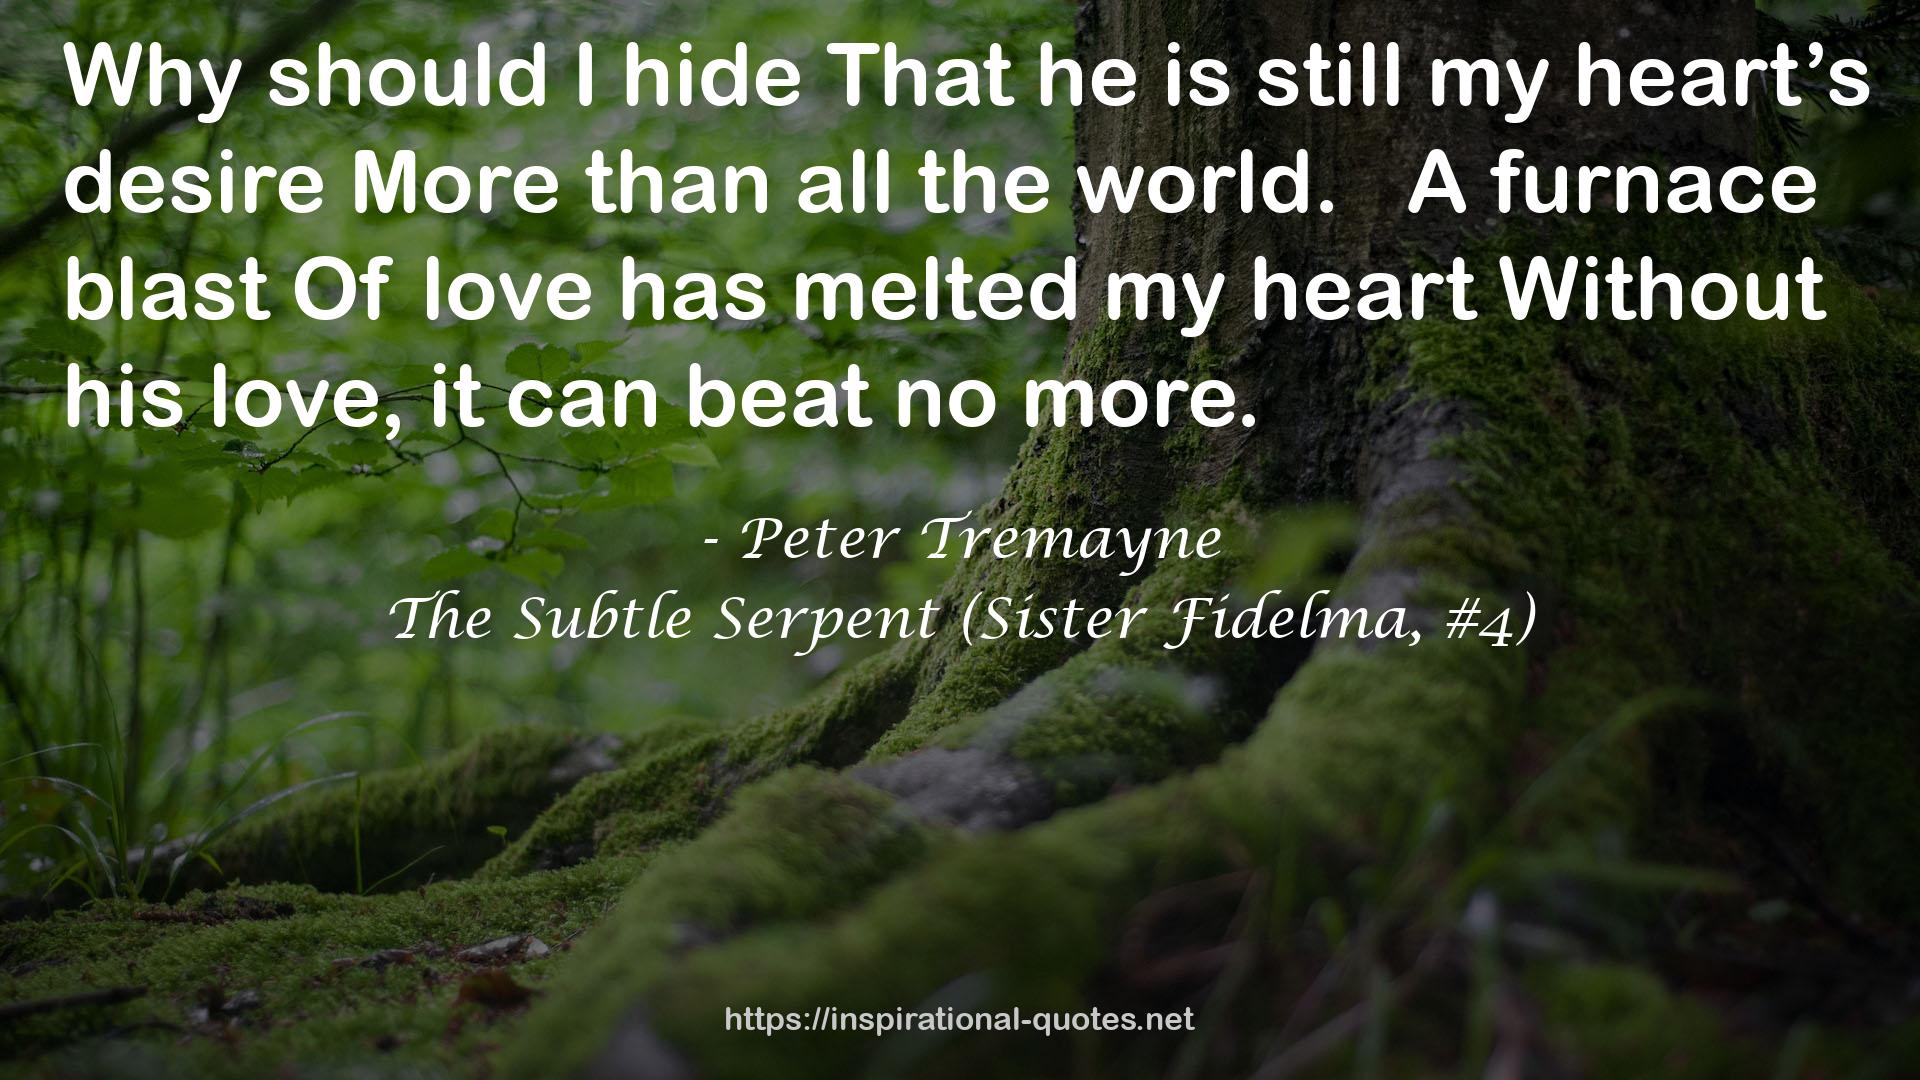 The Subtle Serpent (Sister Fidelma, #4) QUOTES